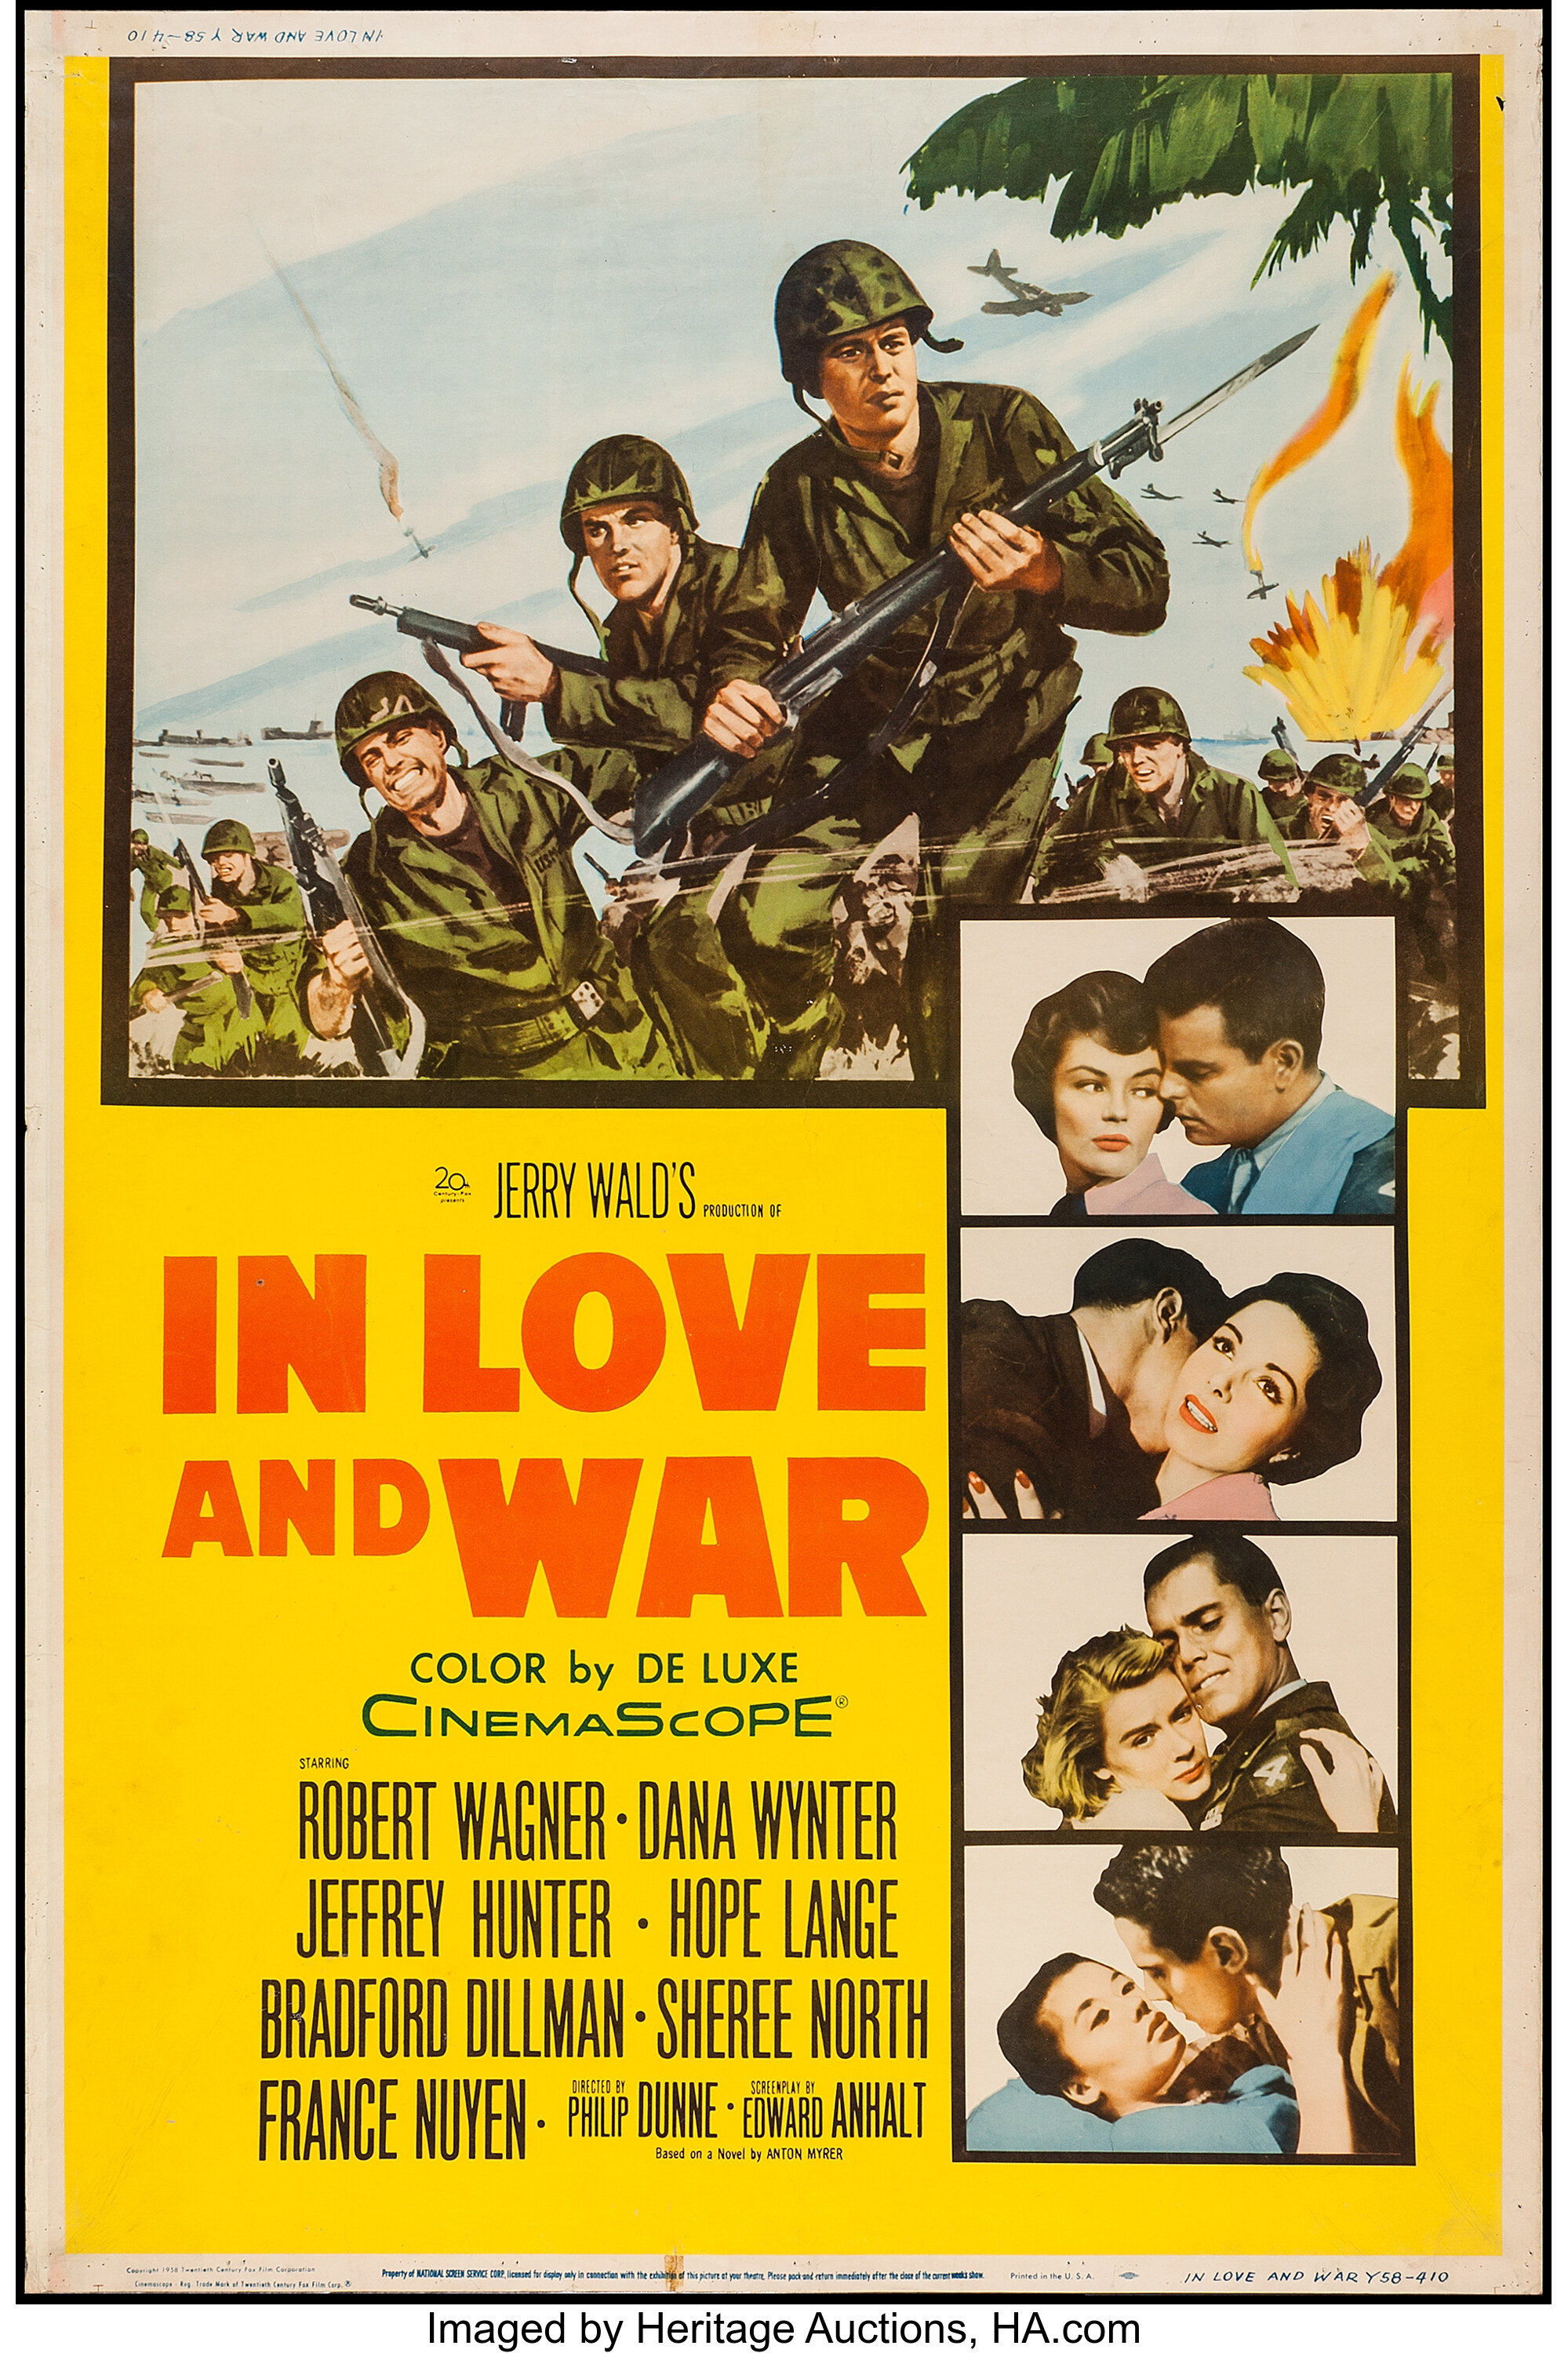 In Love And War Other Lot th Century Fox 1958 Posters 2 Lot 502 Heritage Auctions